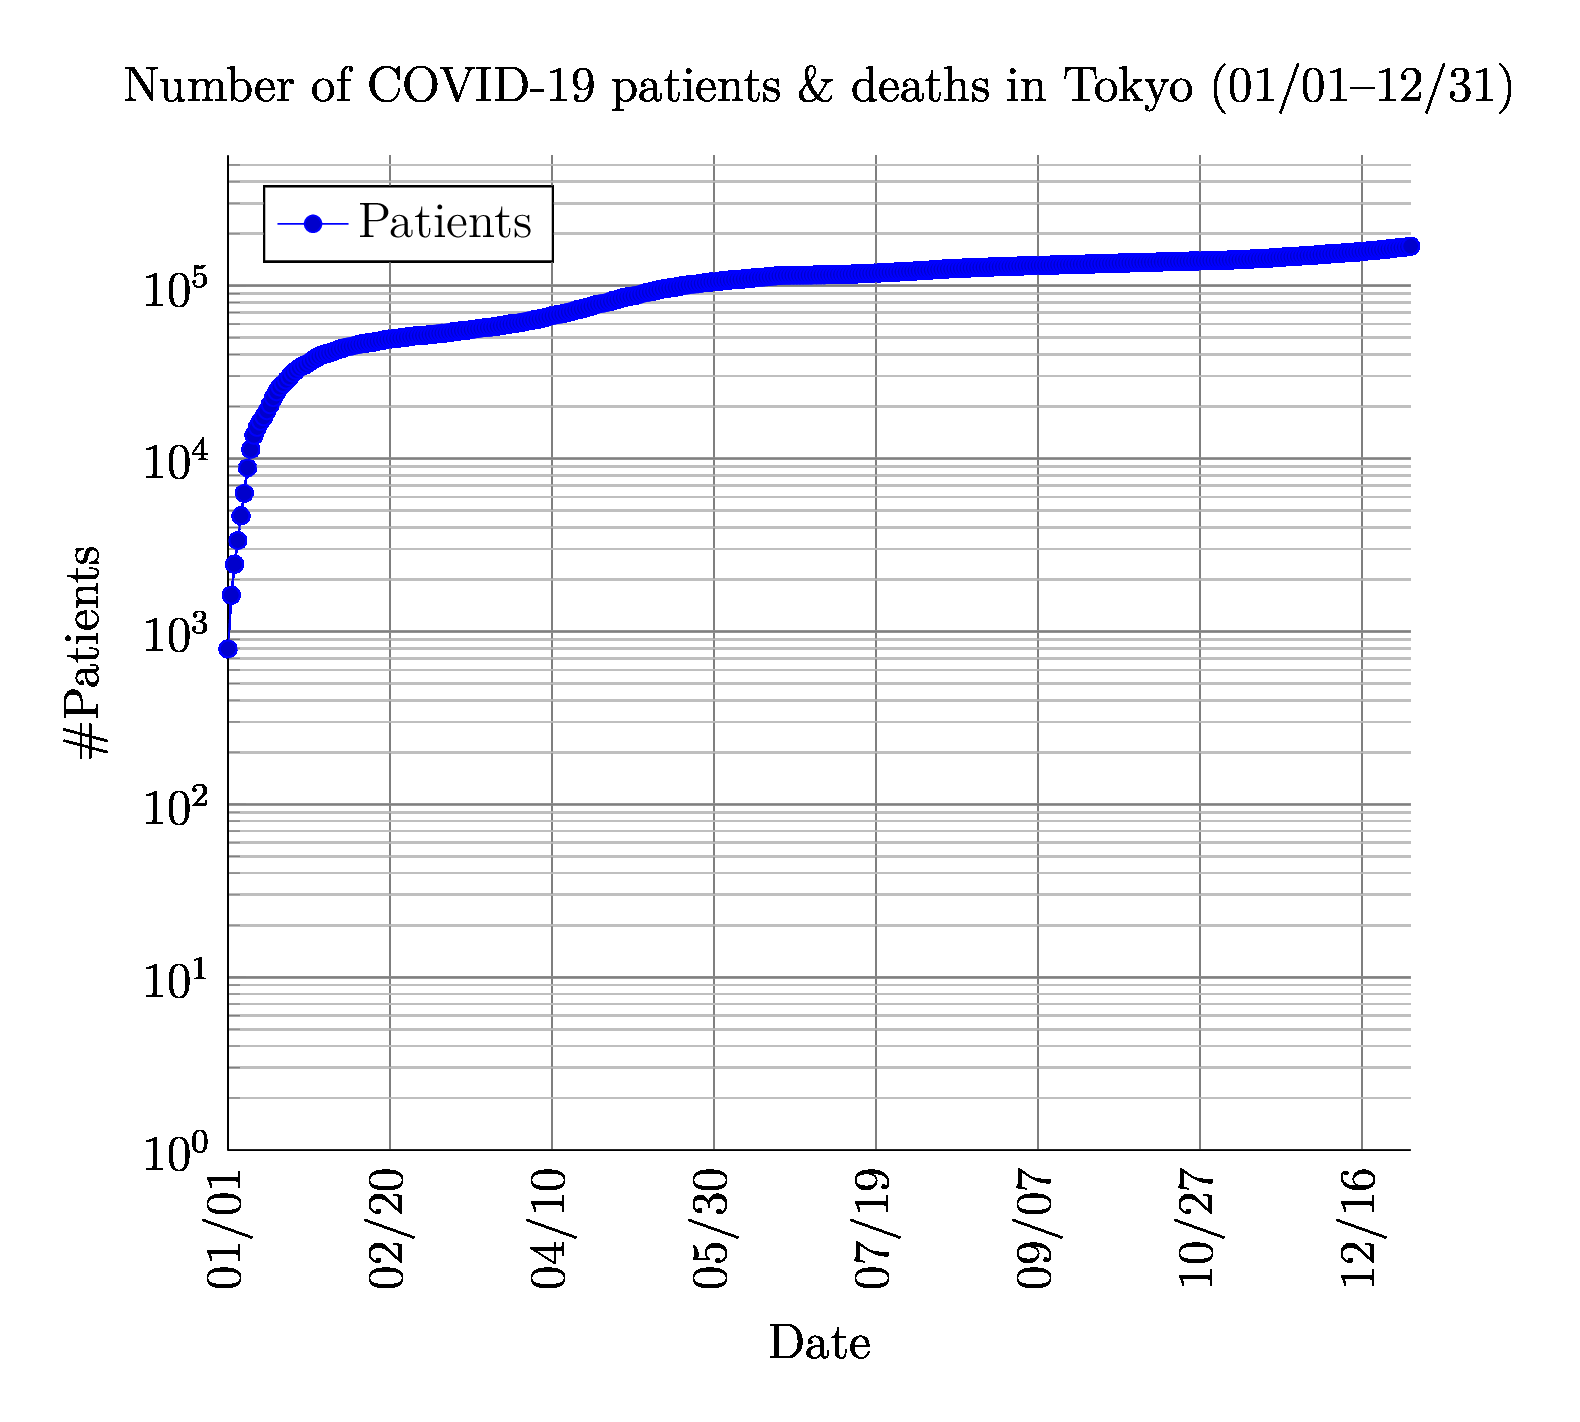 Number of COVID-19 patients in Tokyo